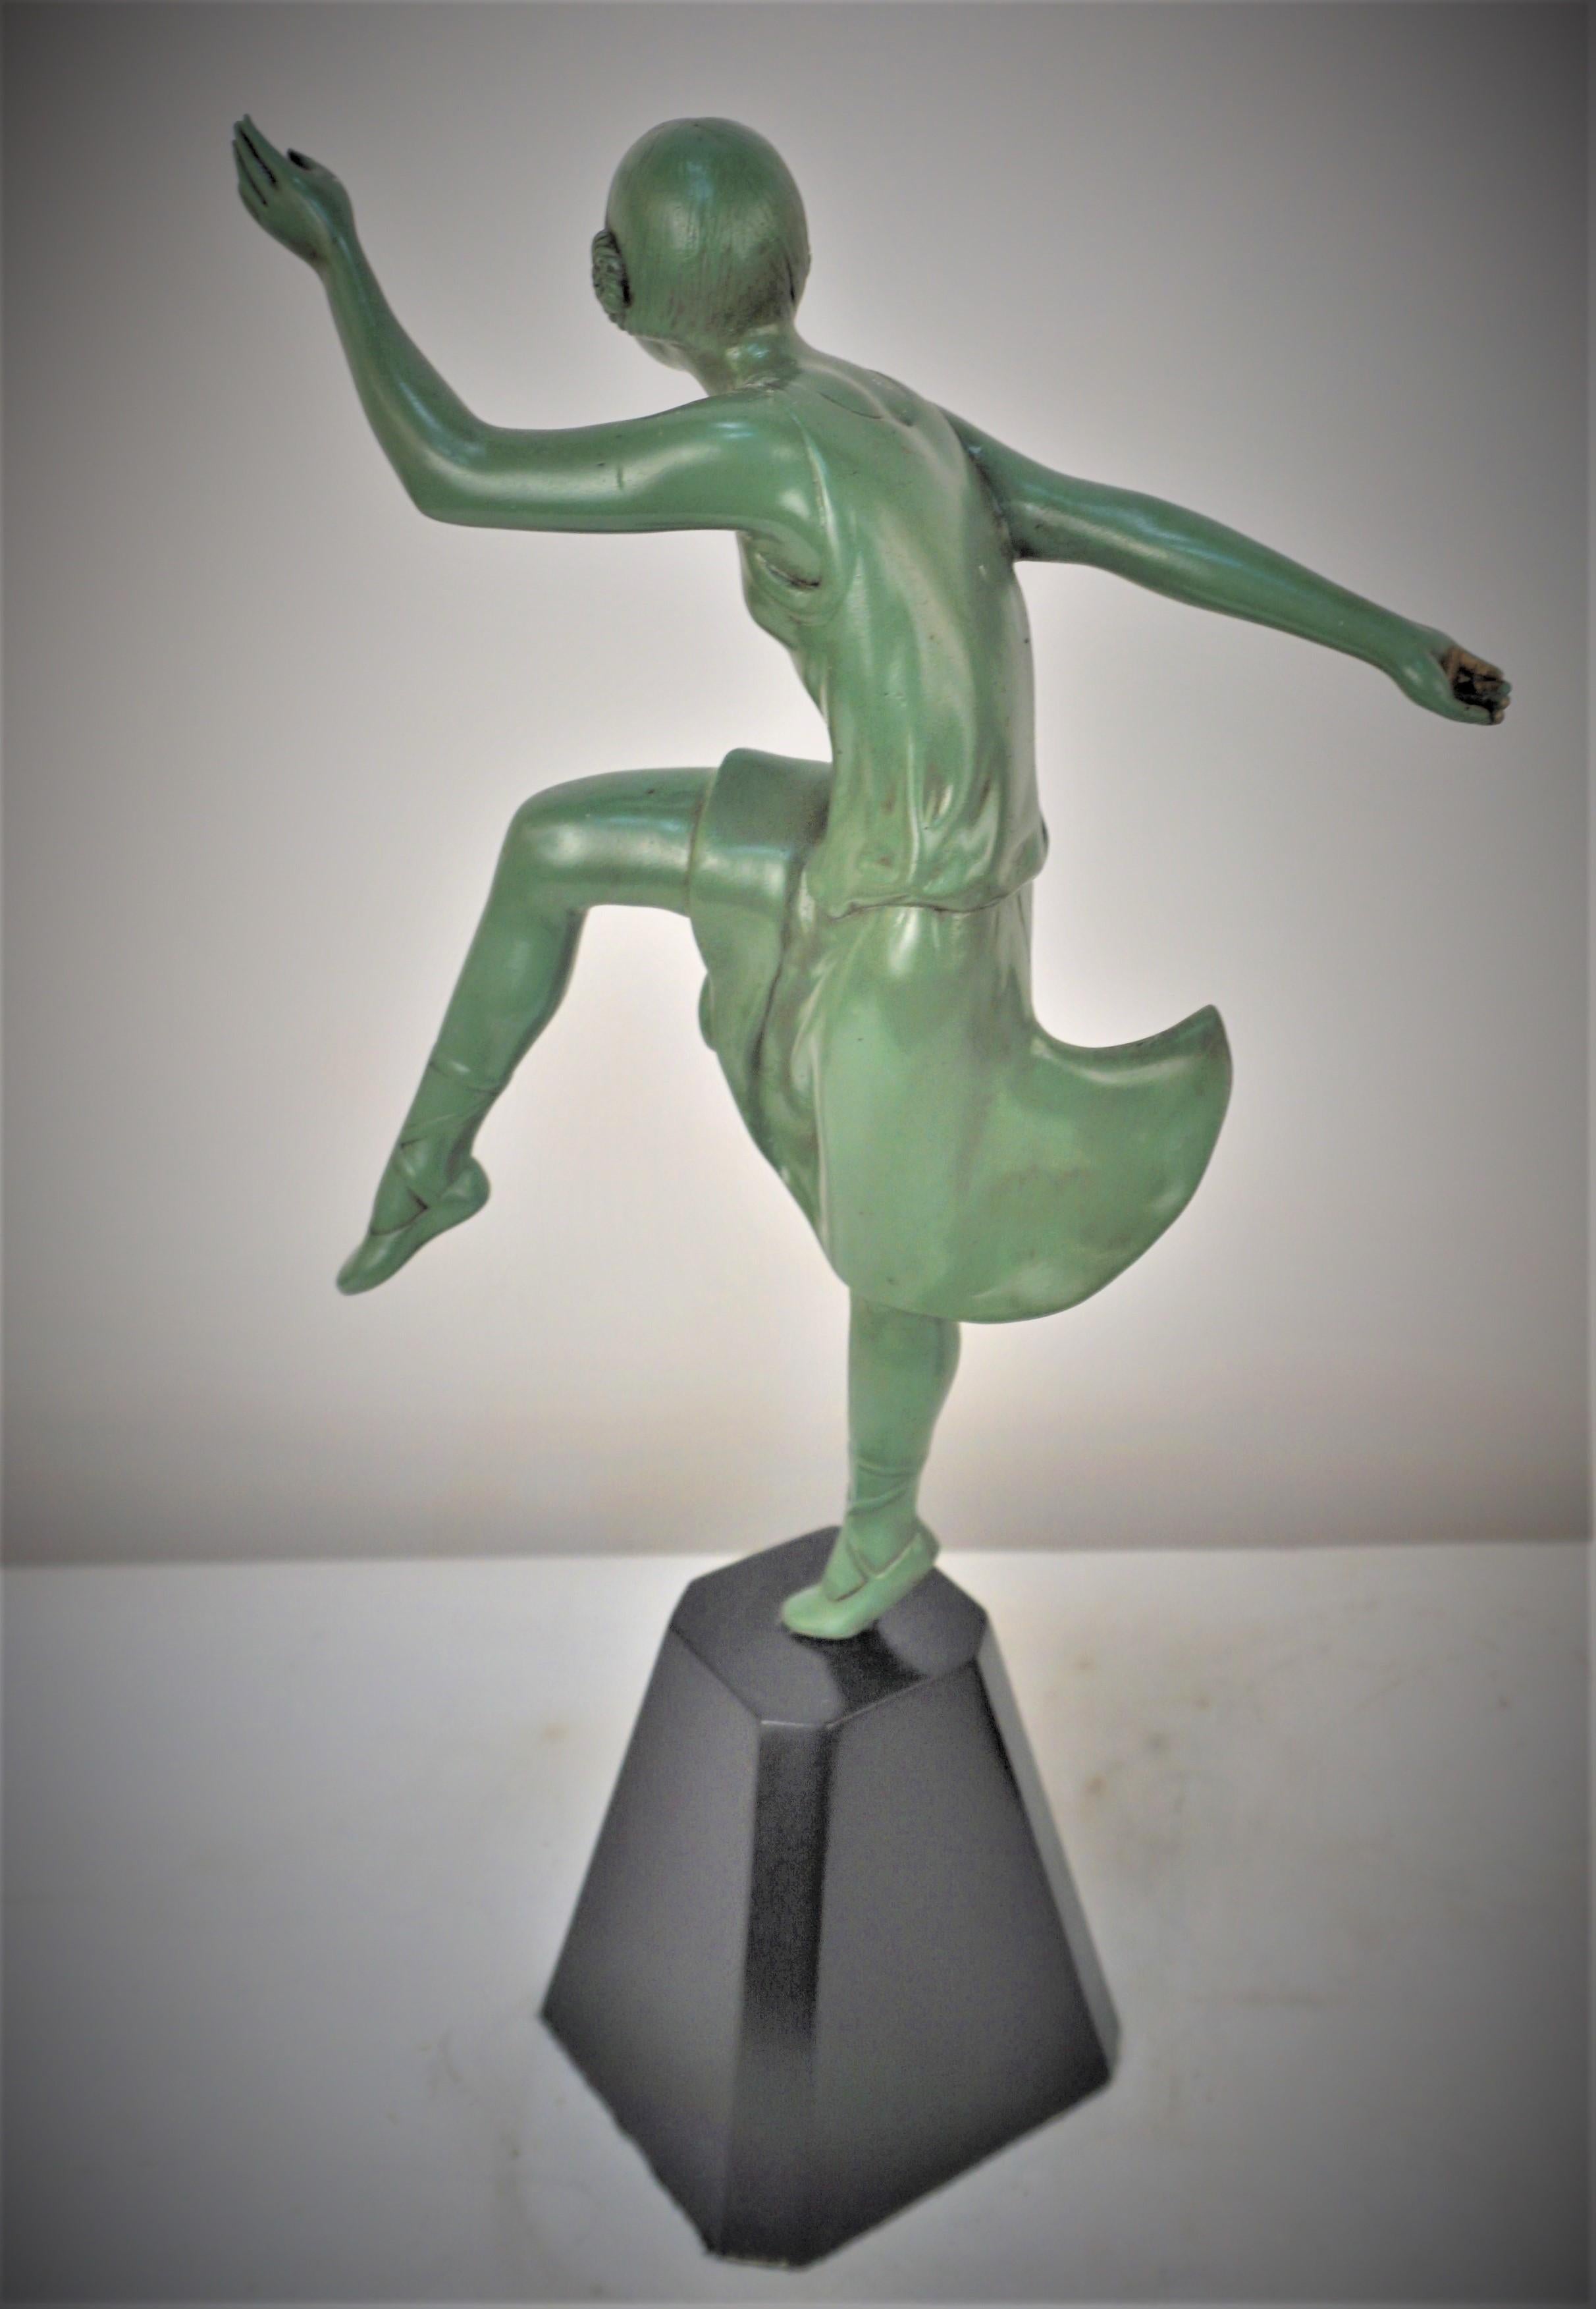 Pair of 1930's French Art Deco Bronze Sculptures of Girls Dancing In Good Condition For Sale In Fairfax, VA